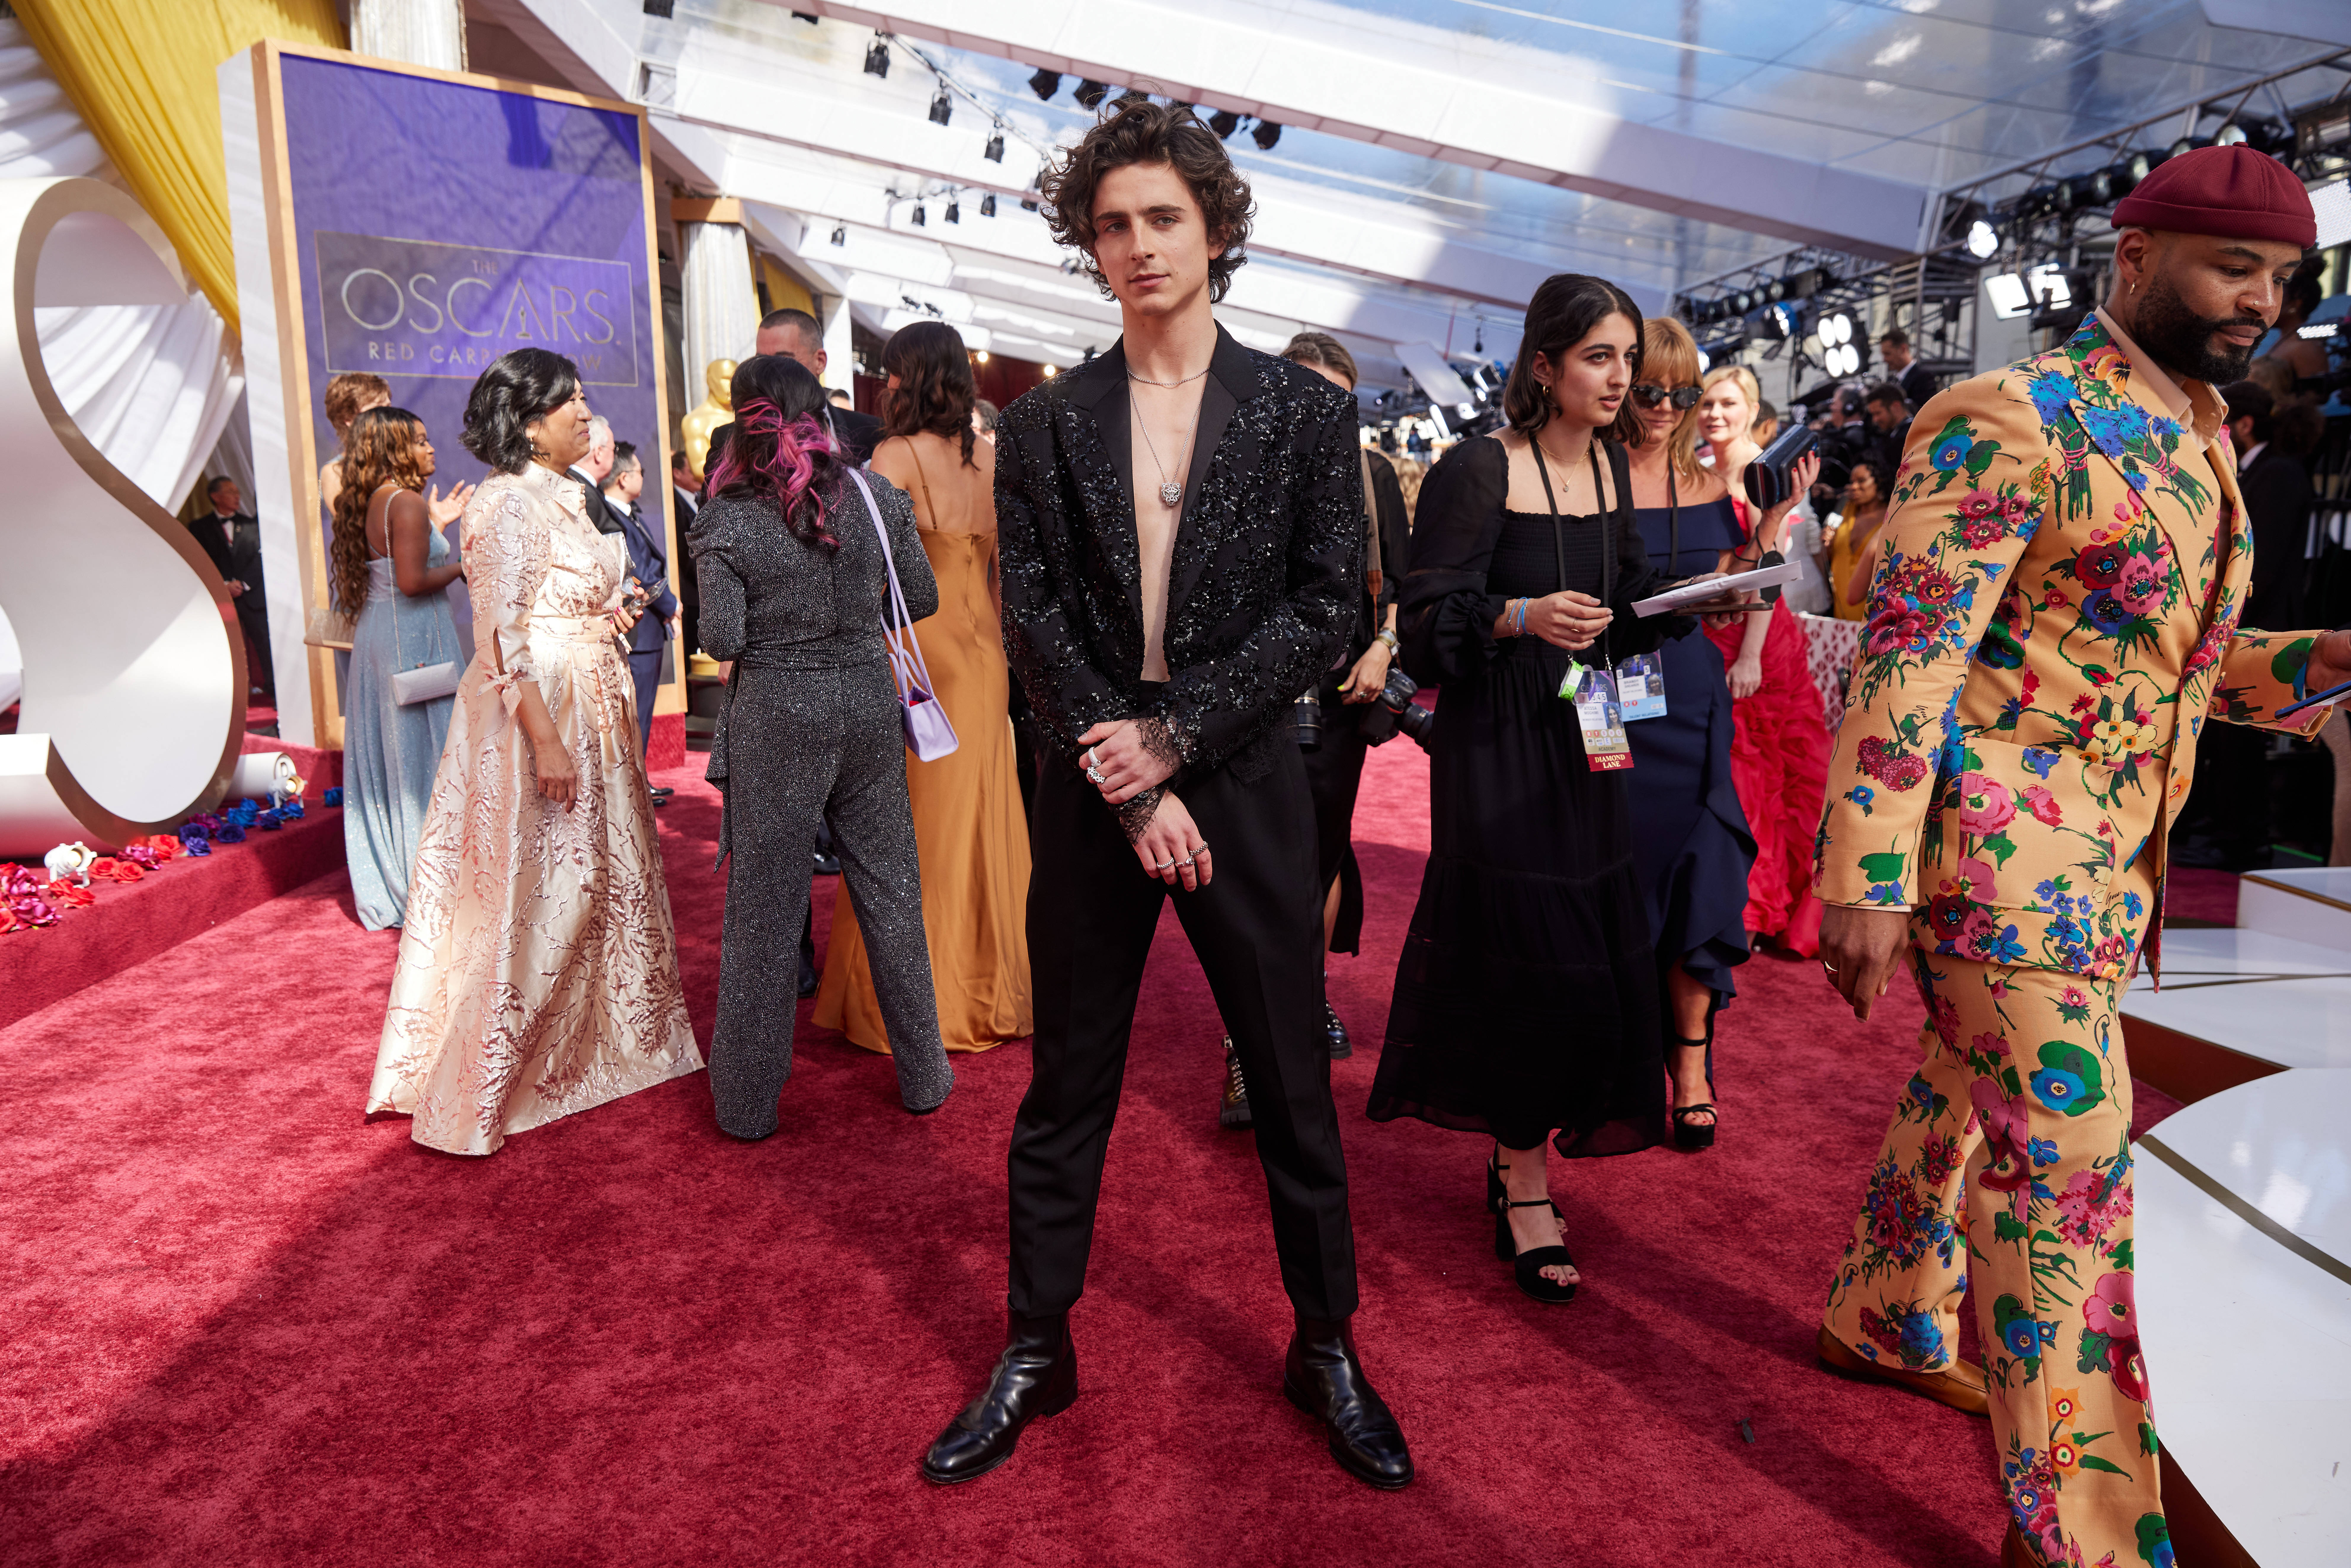 Chest in show: Timothée Chalamet gives 2022's Oscar red carpet its biggest  fashion moment, Oscars 2022